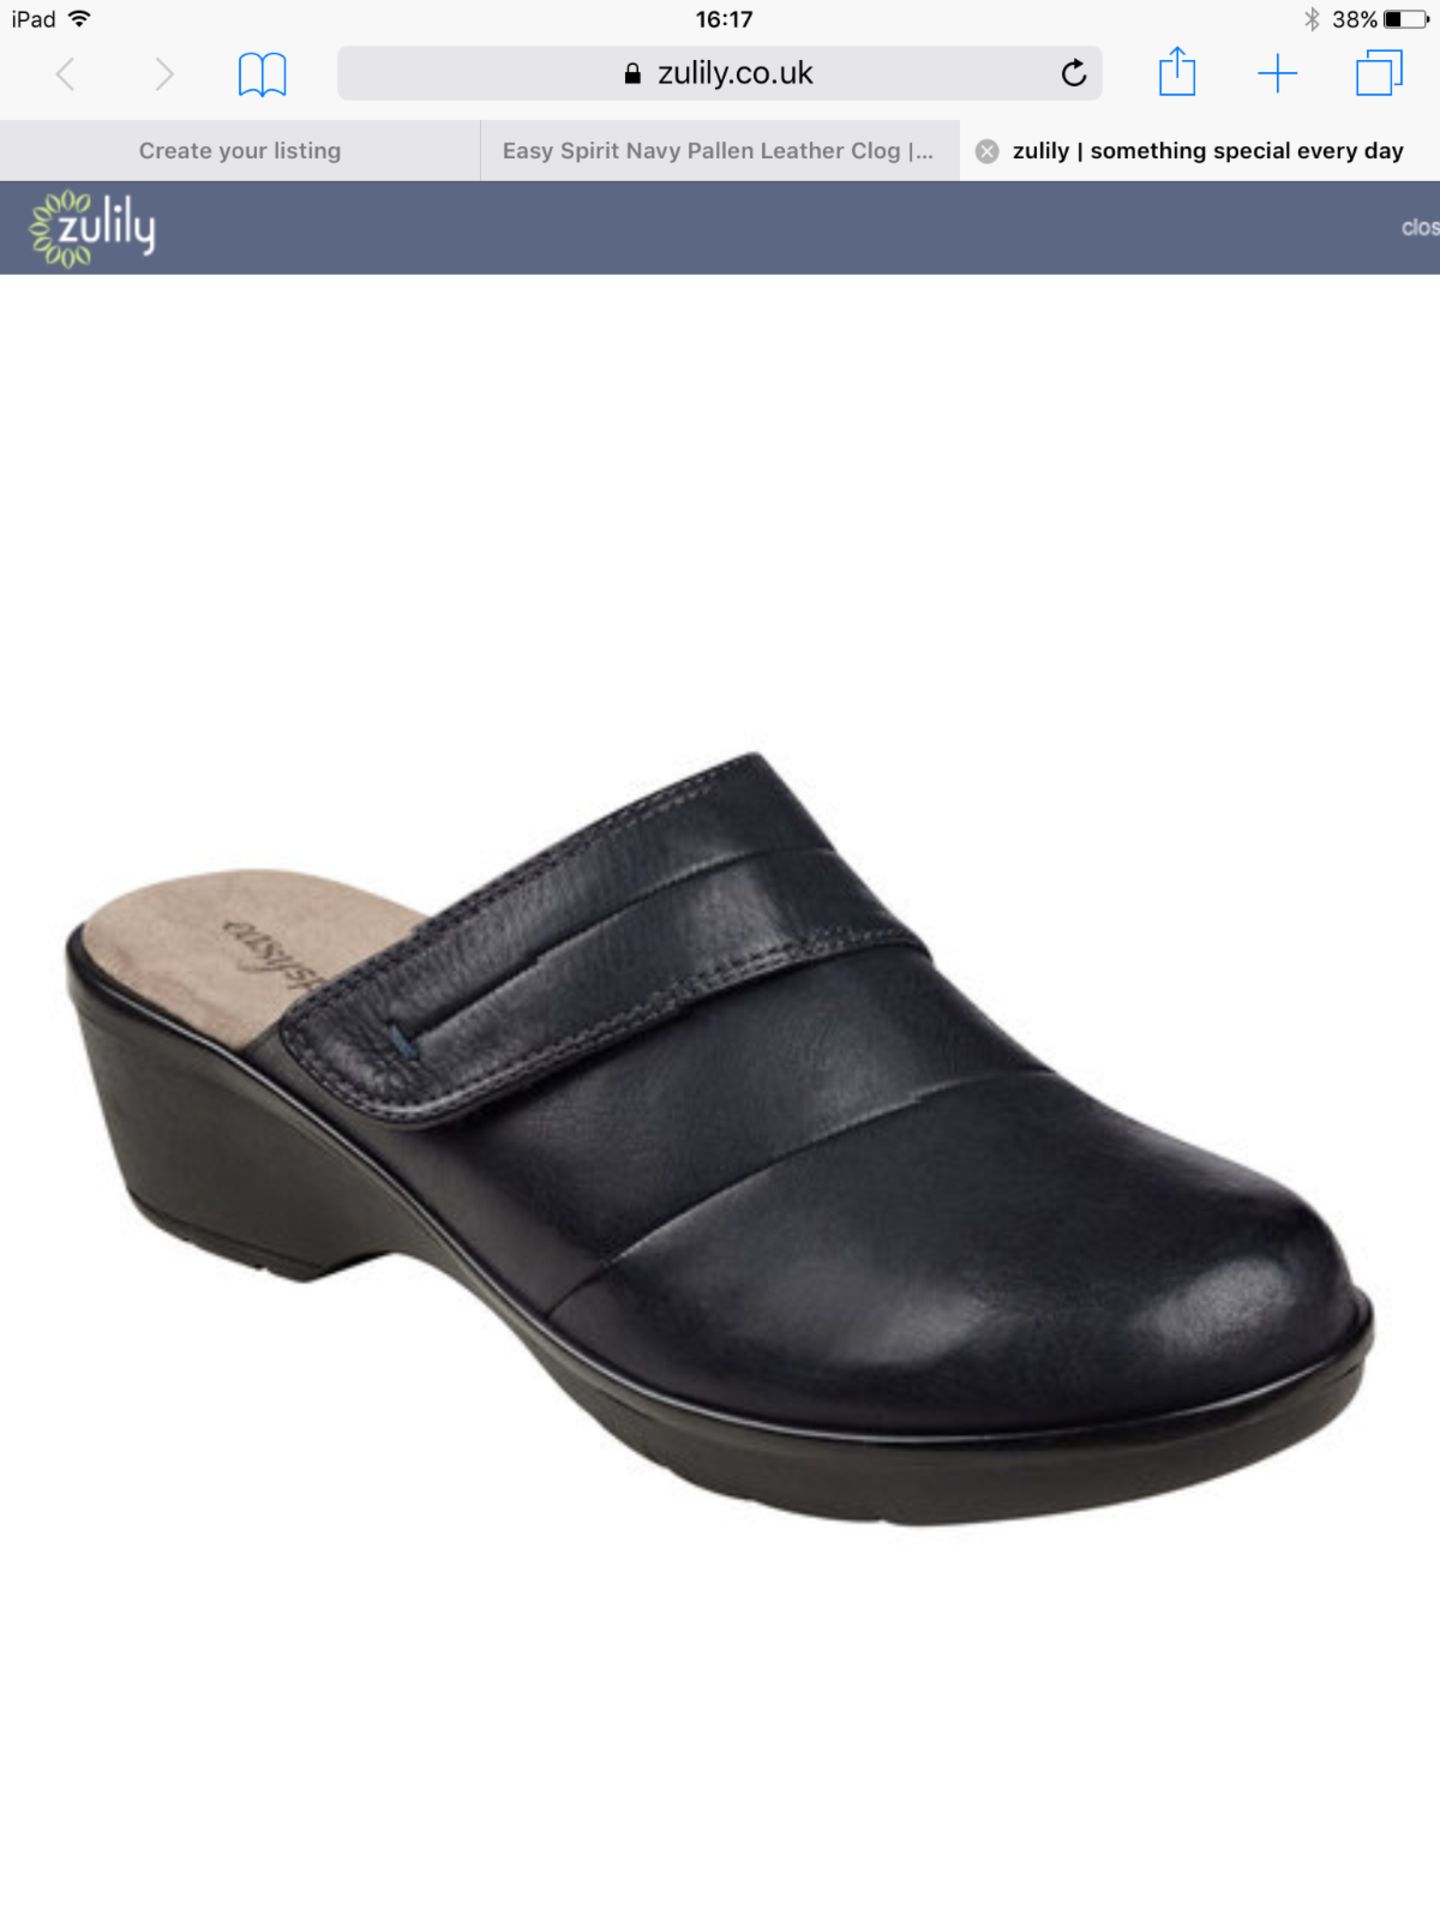 Easy Spirit Navy Pallen Leather Clog, Size Eur 37 (New with box)